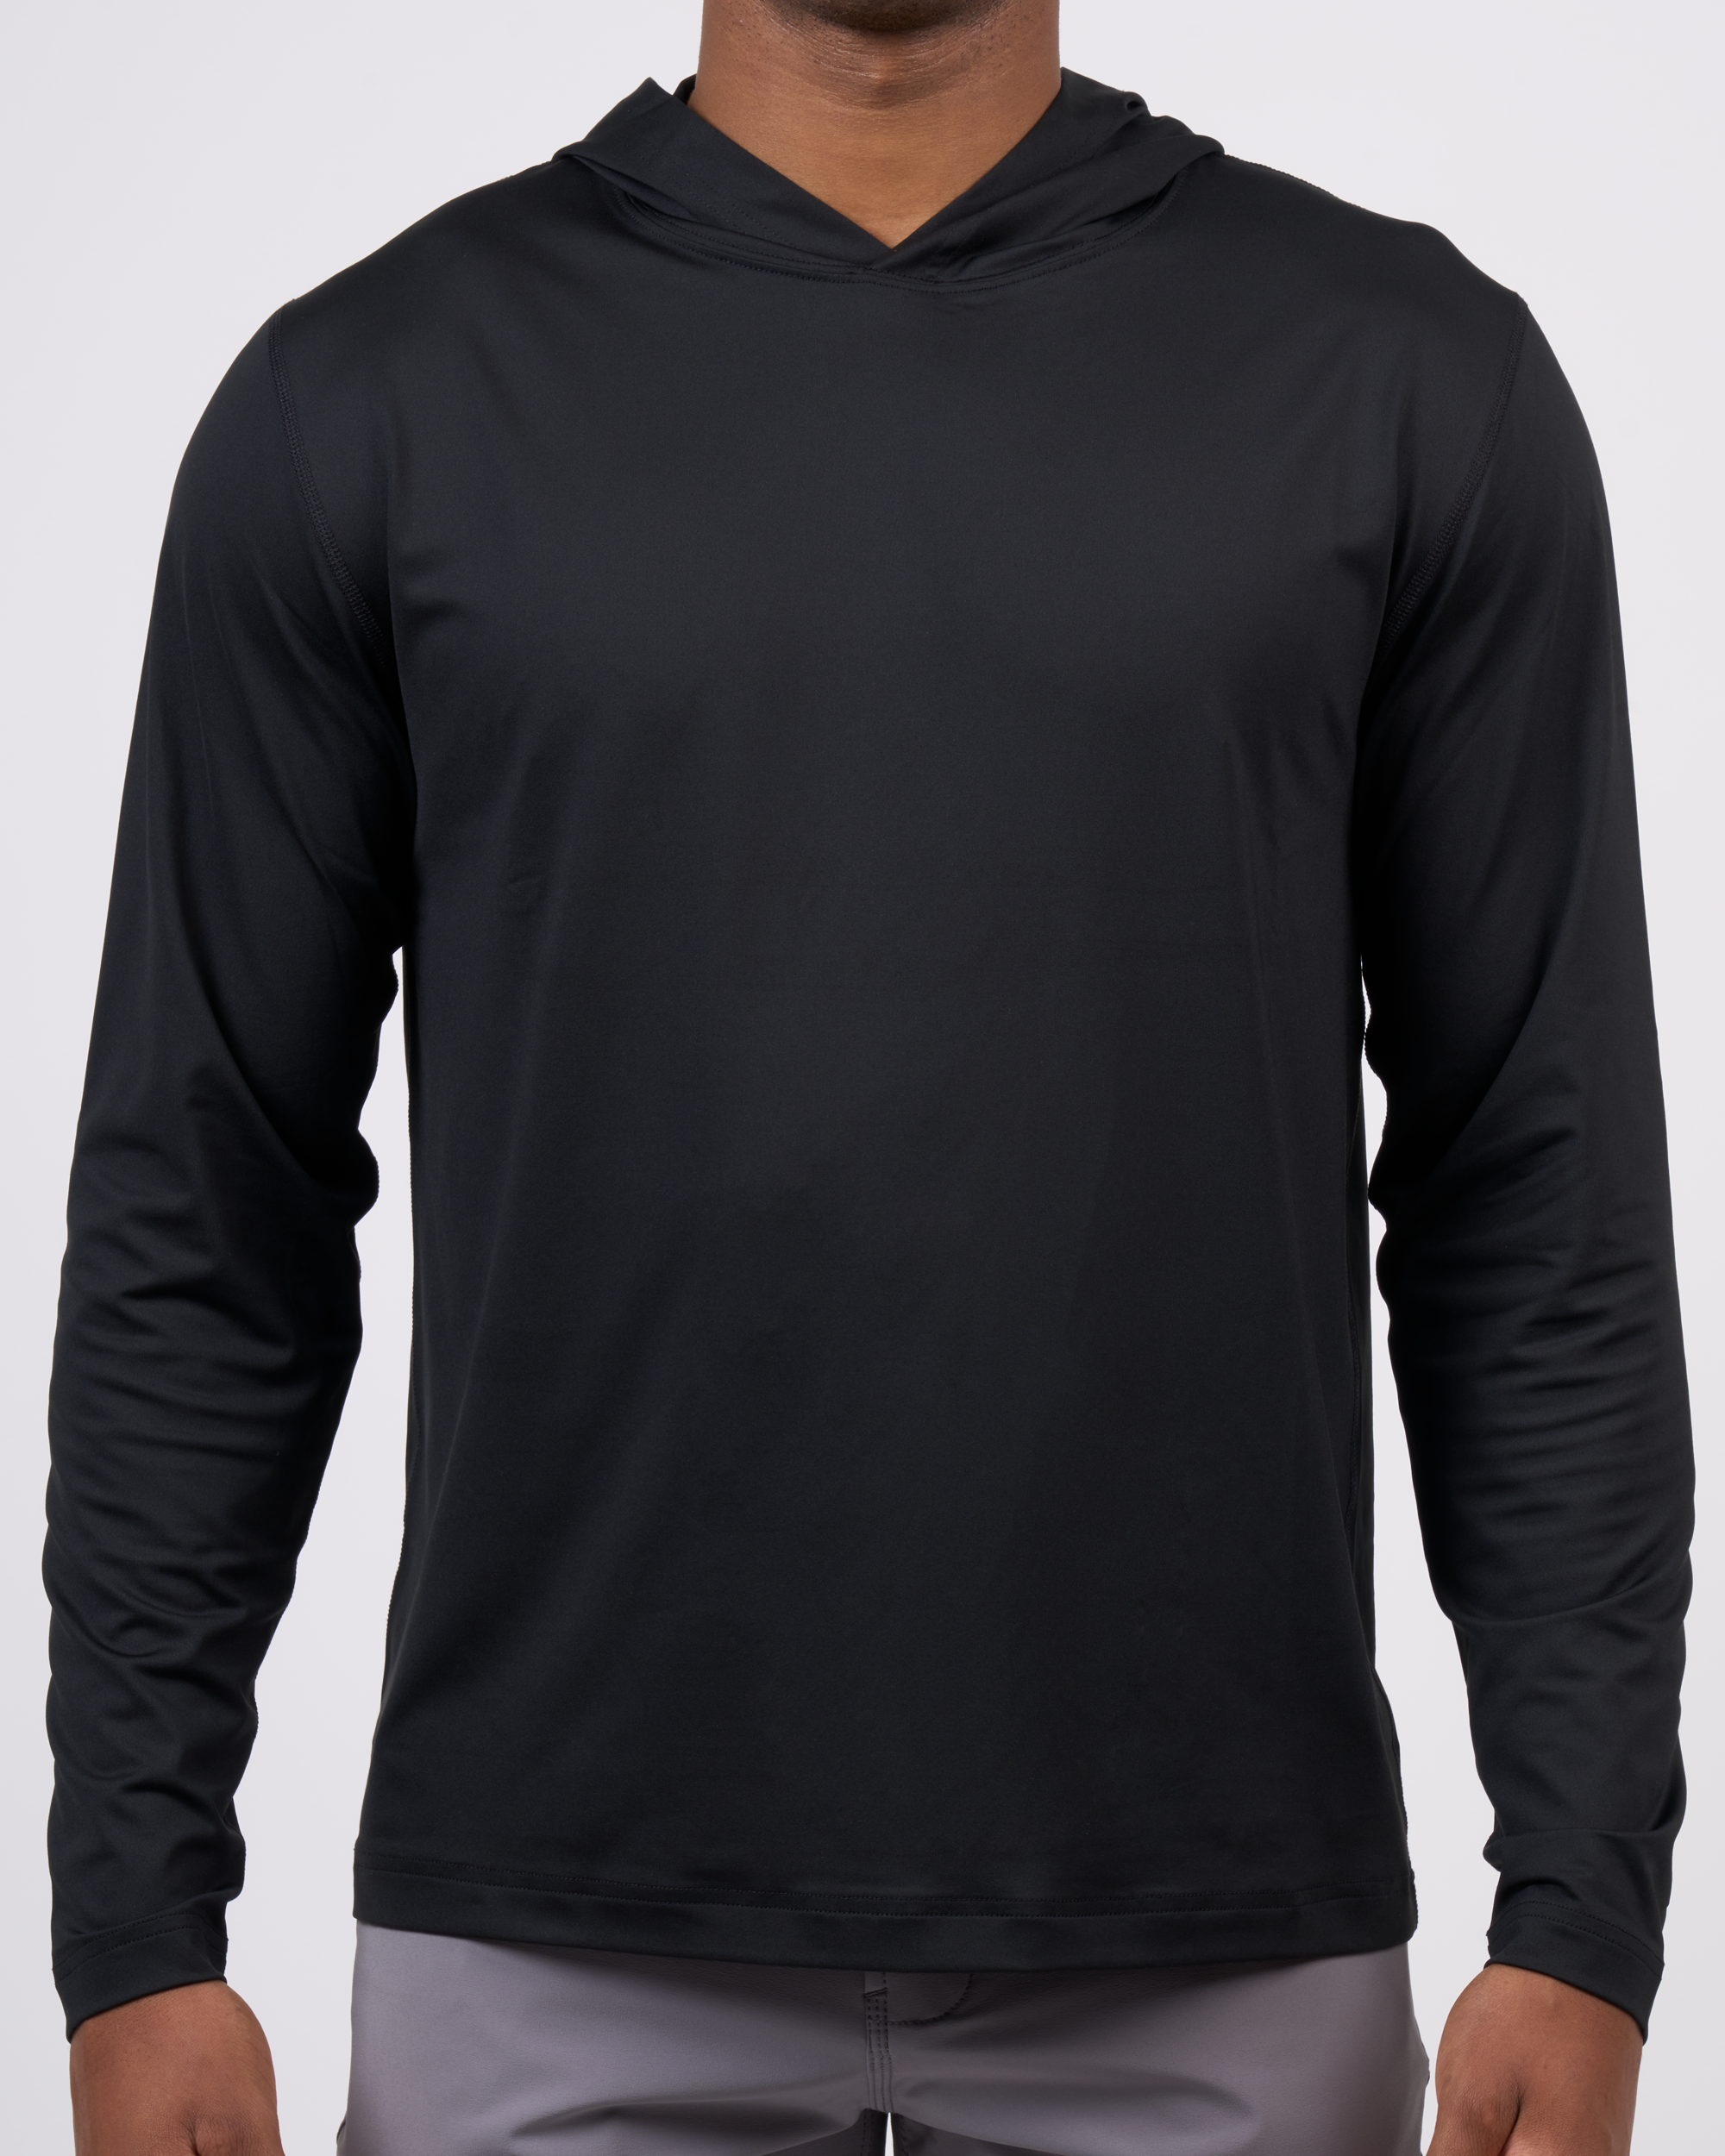 Foreign Rider Co Technical Fabric Black Long-Sleeve Hooded T-Shirt Chest Detail